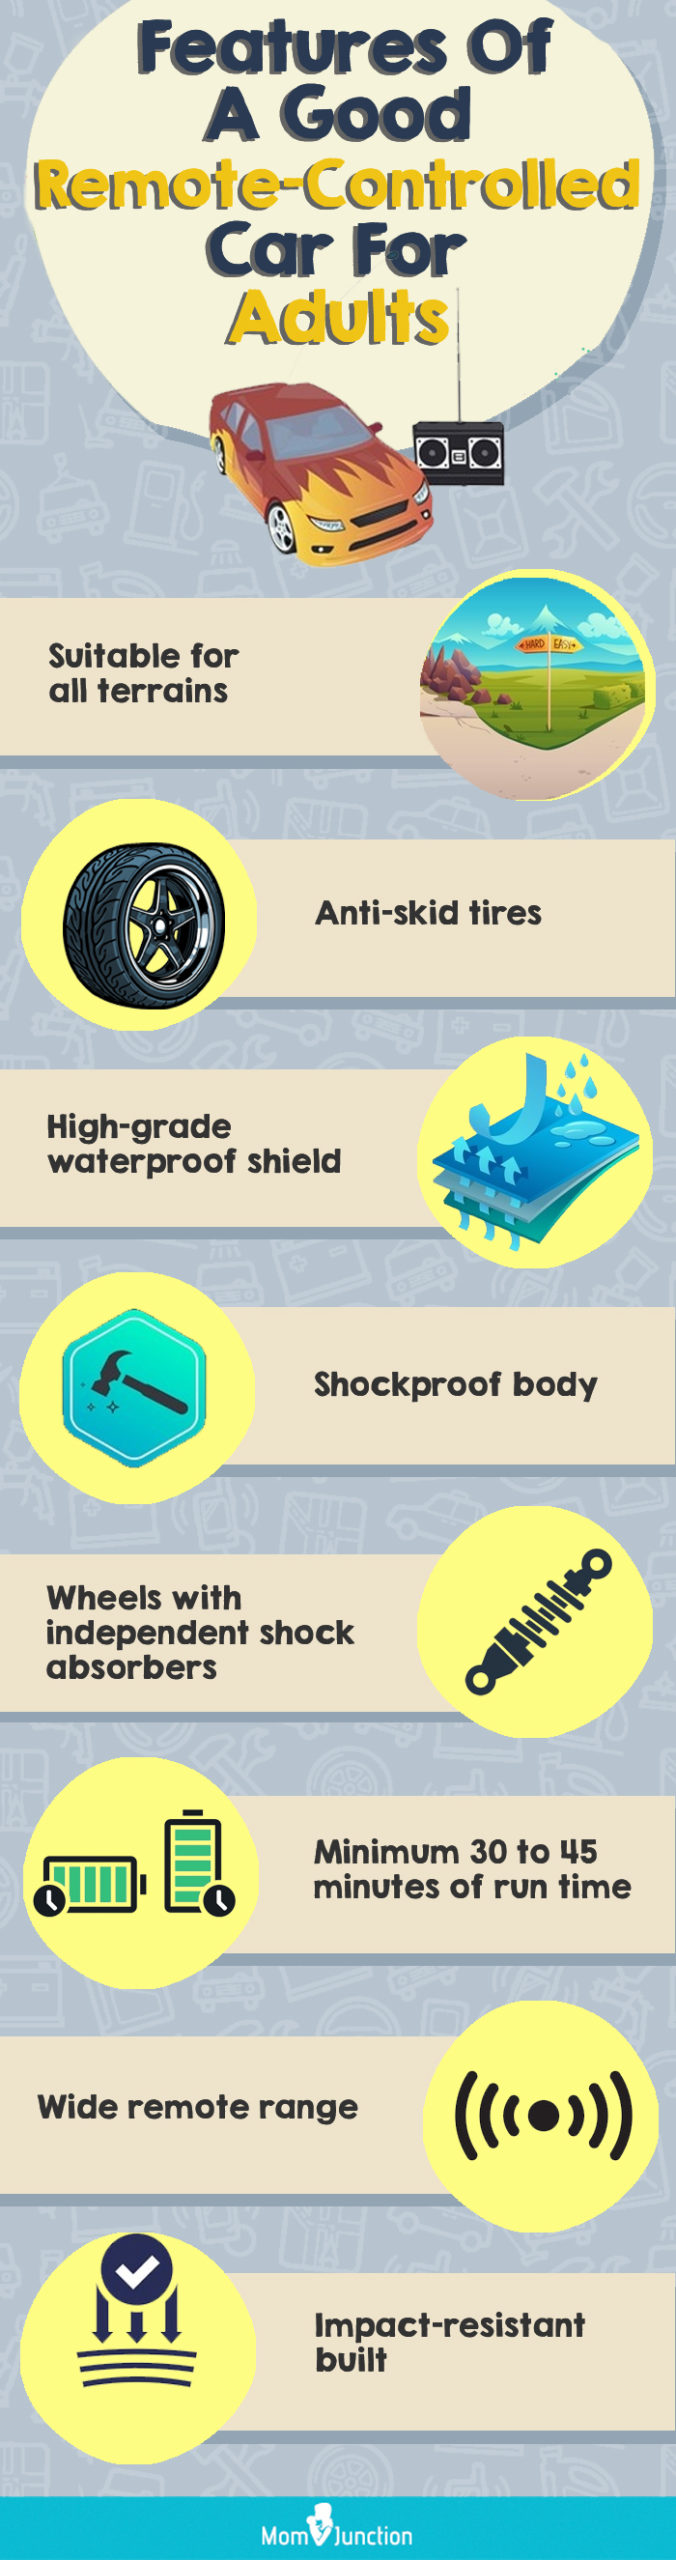 Features Of A Good Remote Controlled Car For Adults (infographic)